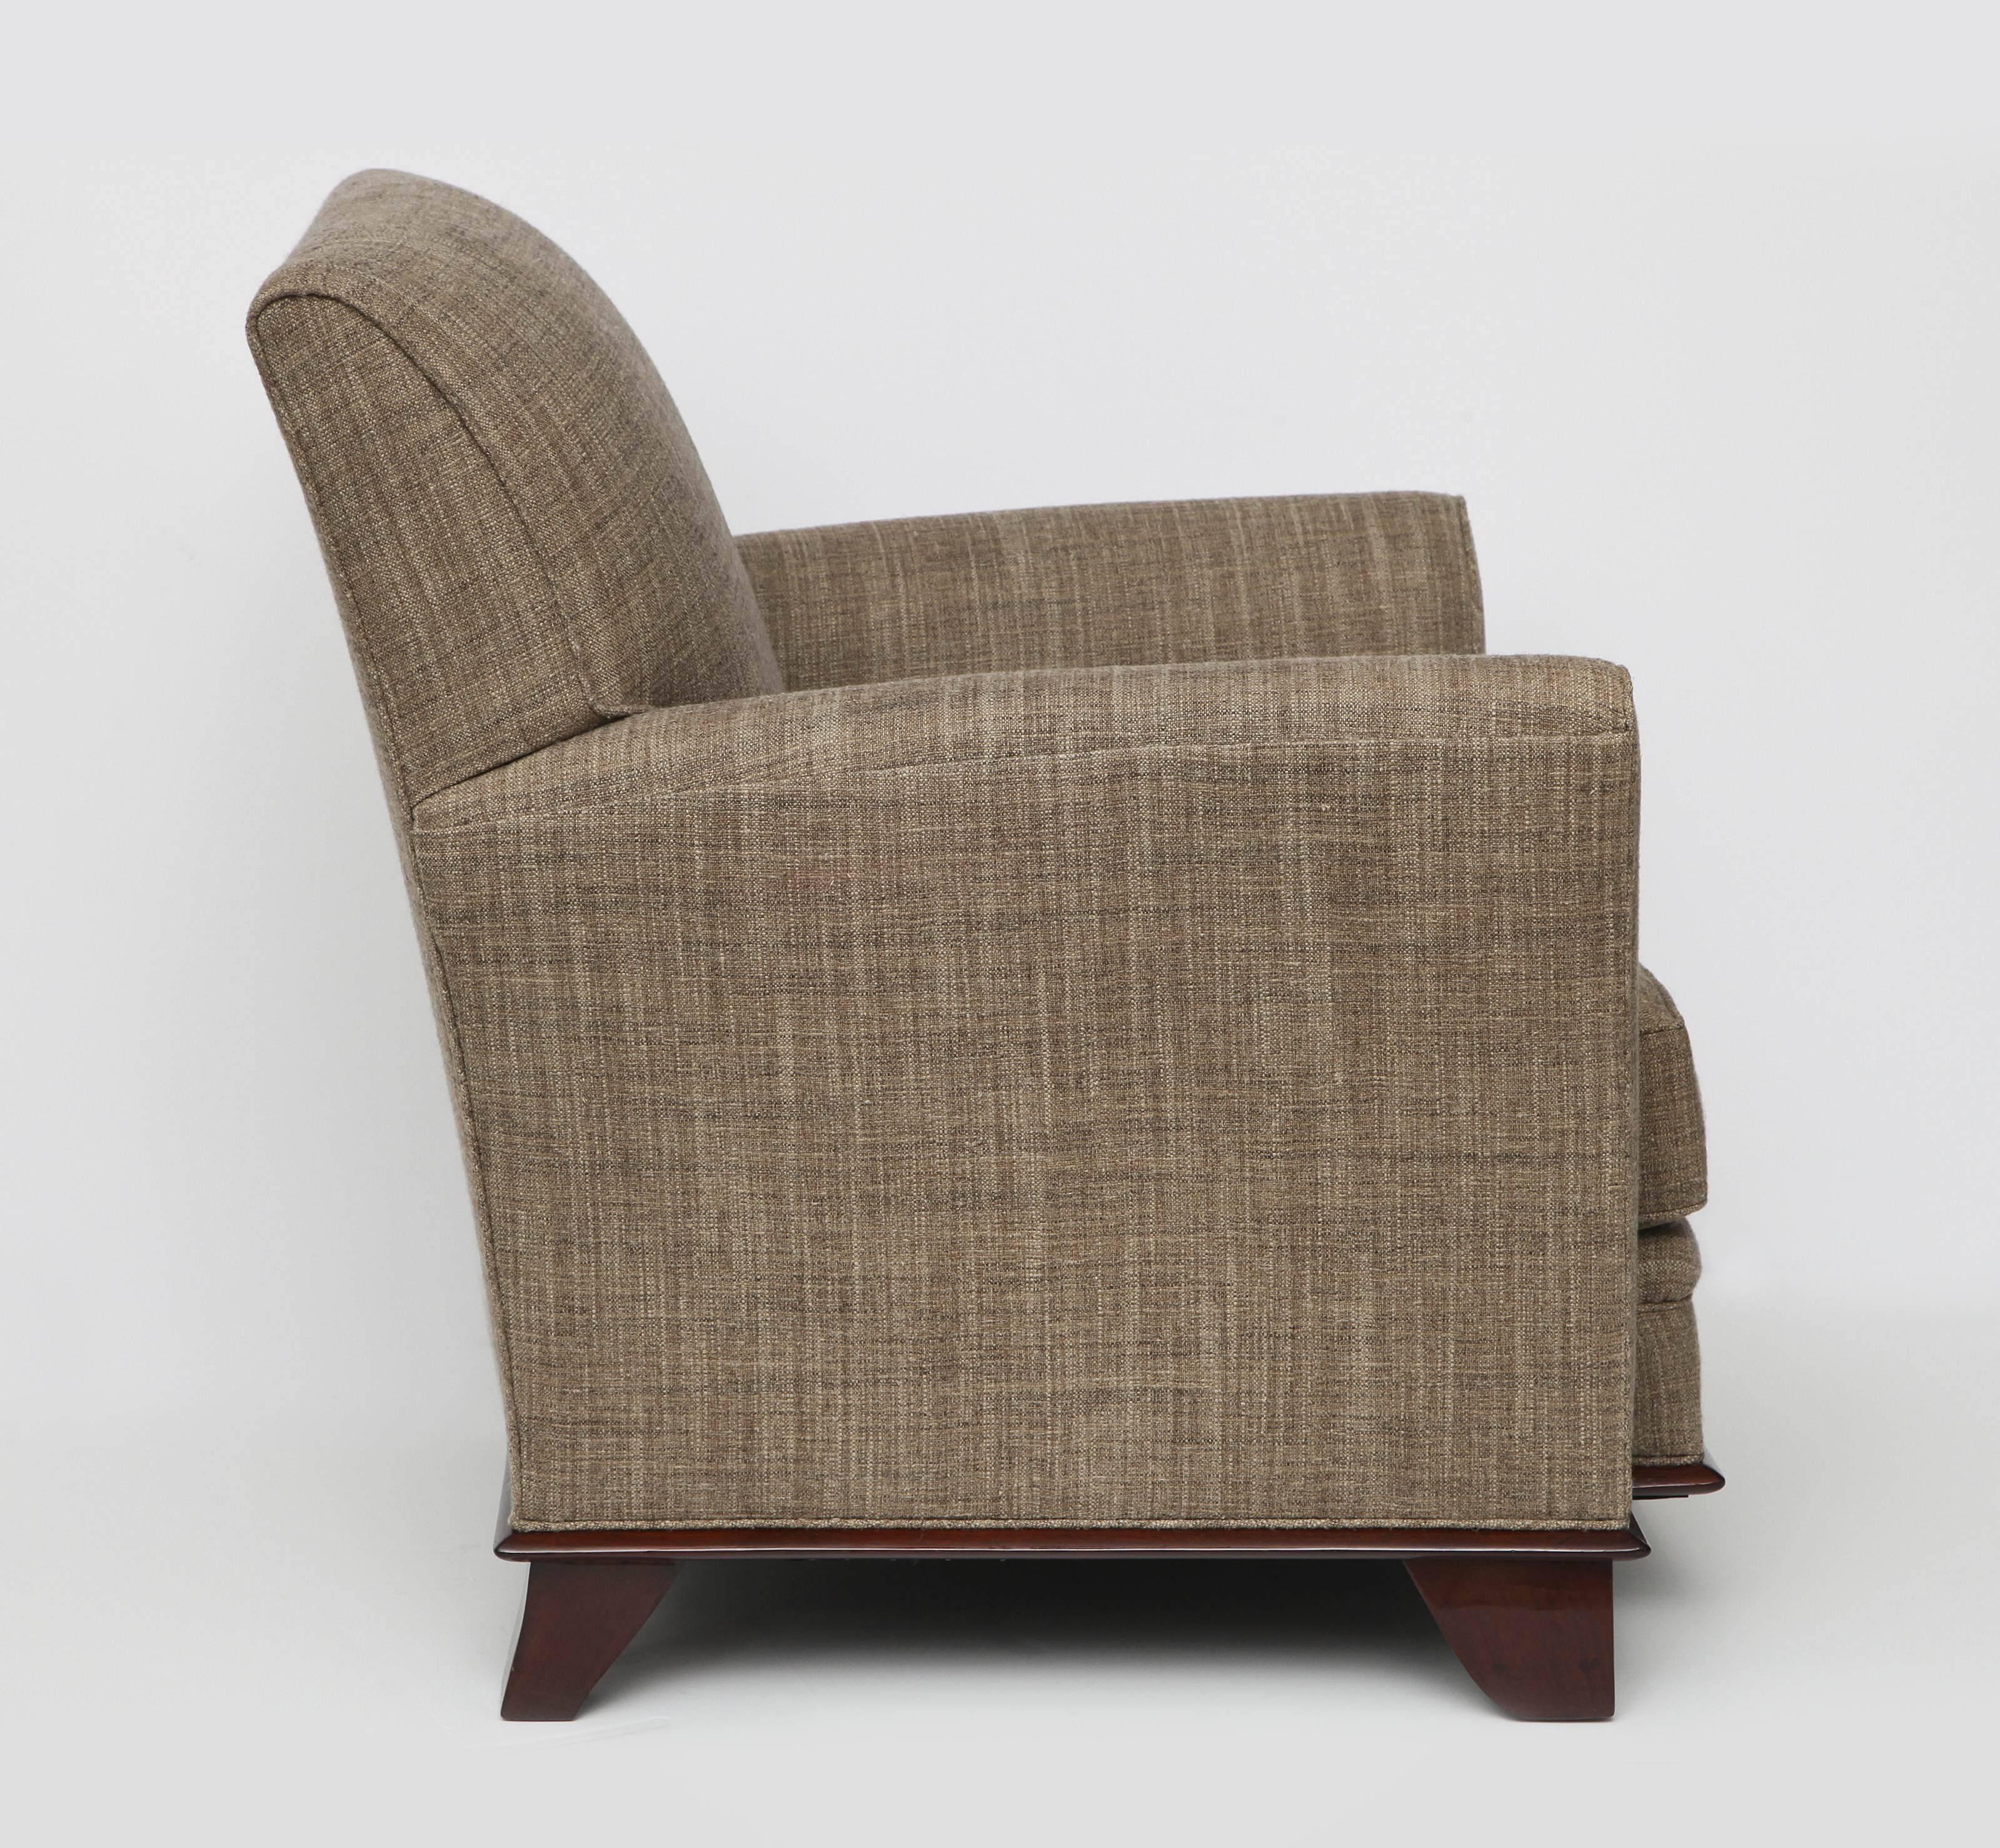 French In the Manner of Dominique, Pair of Art Deco Armchairs, France, C. 1930